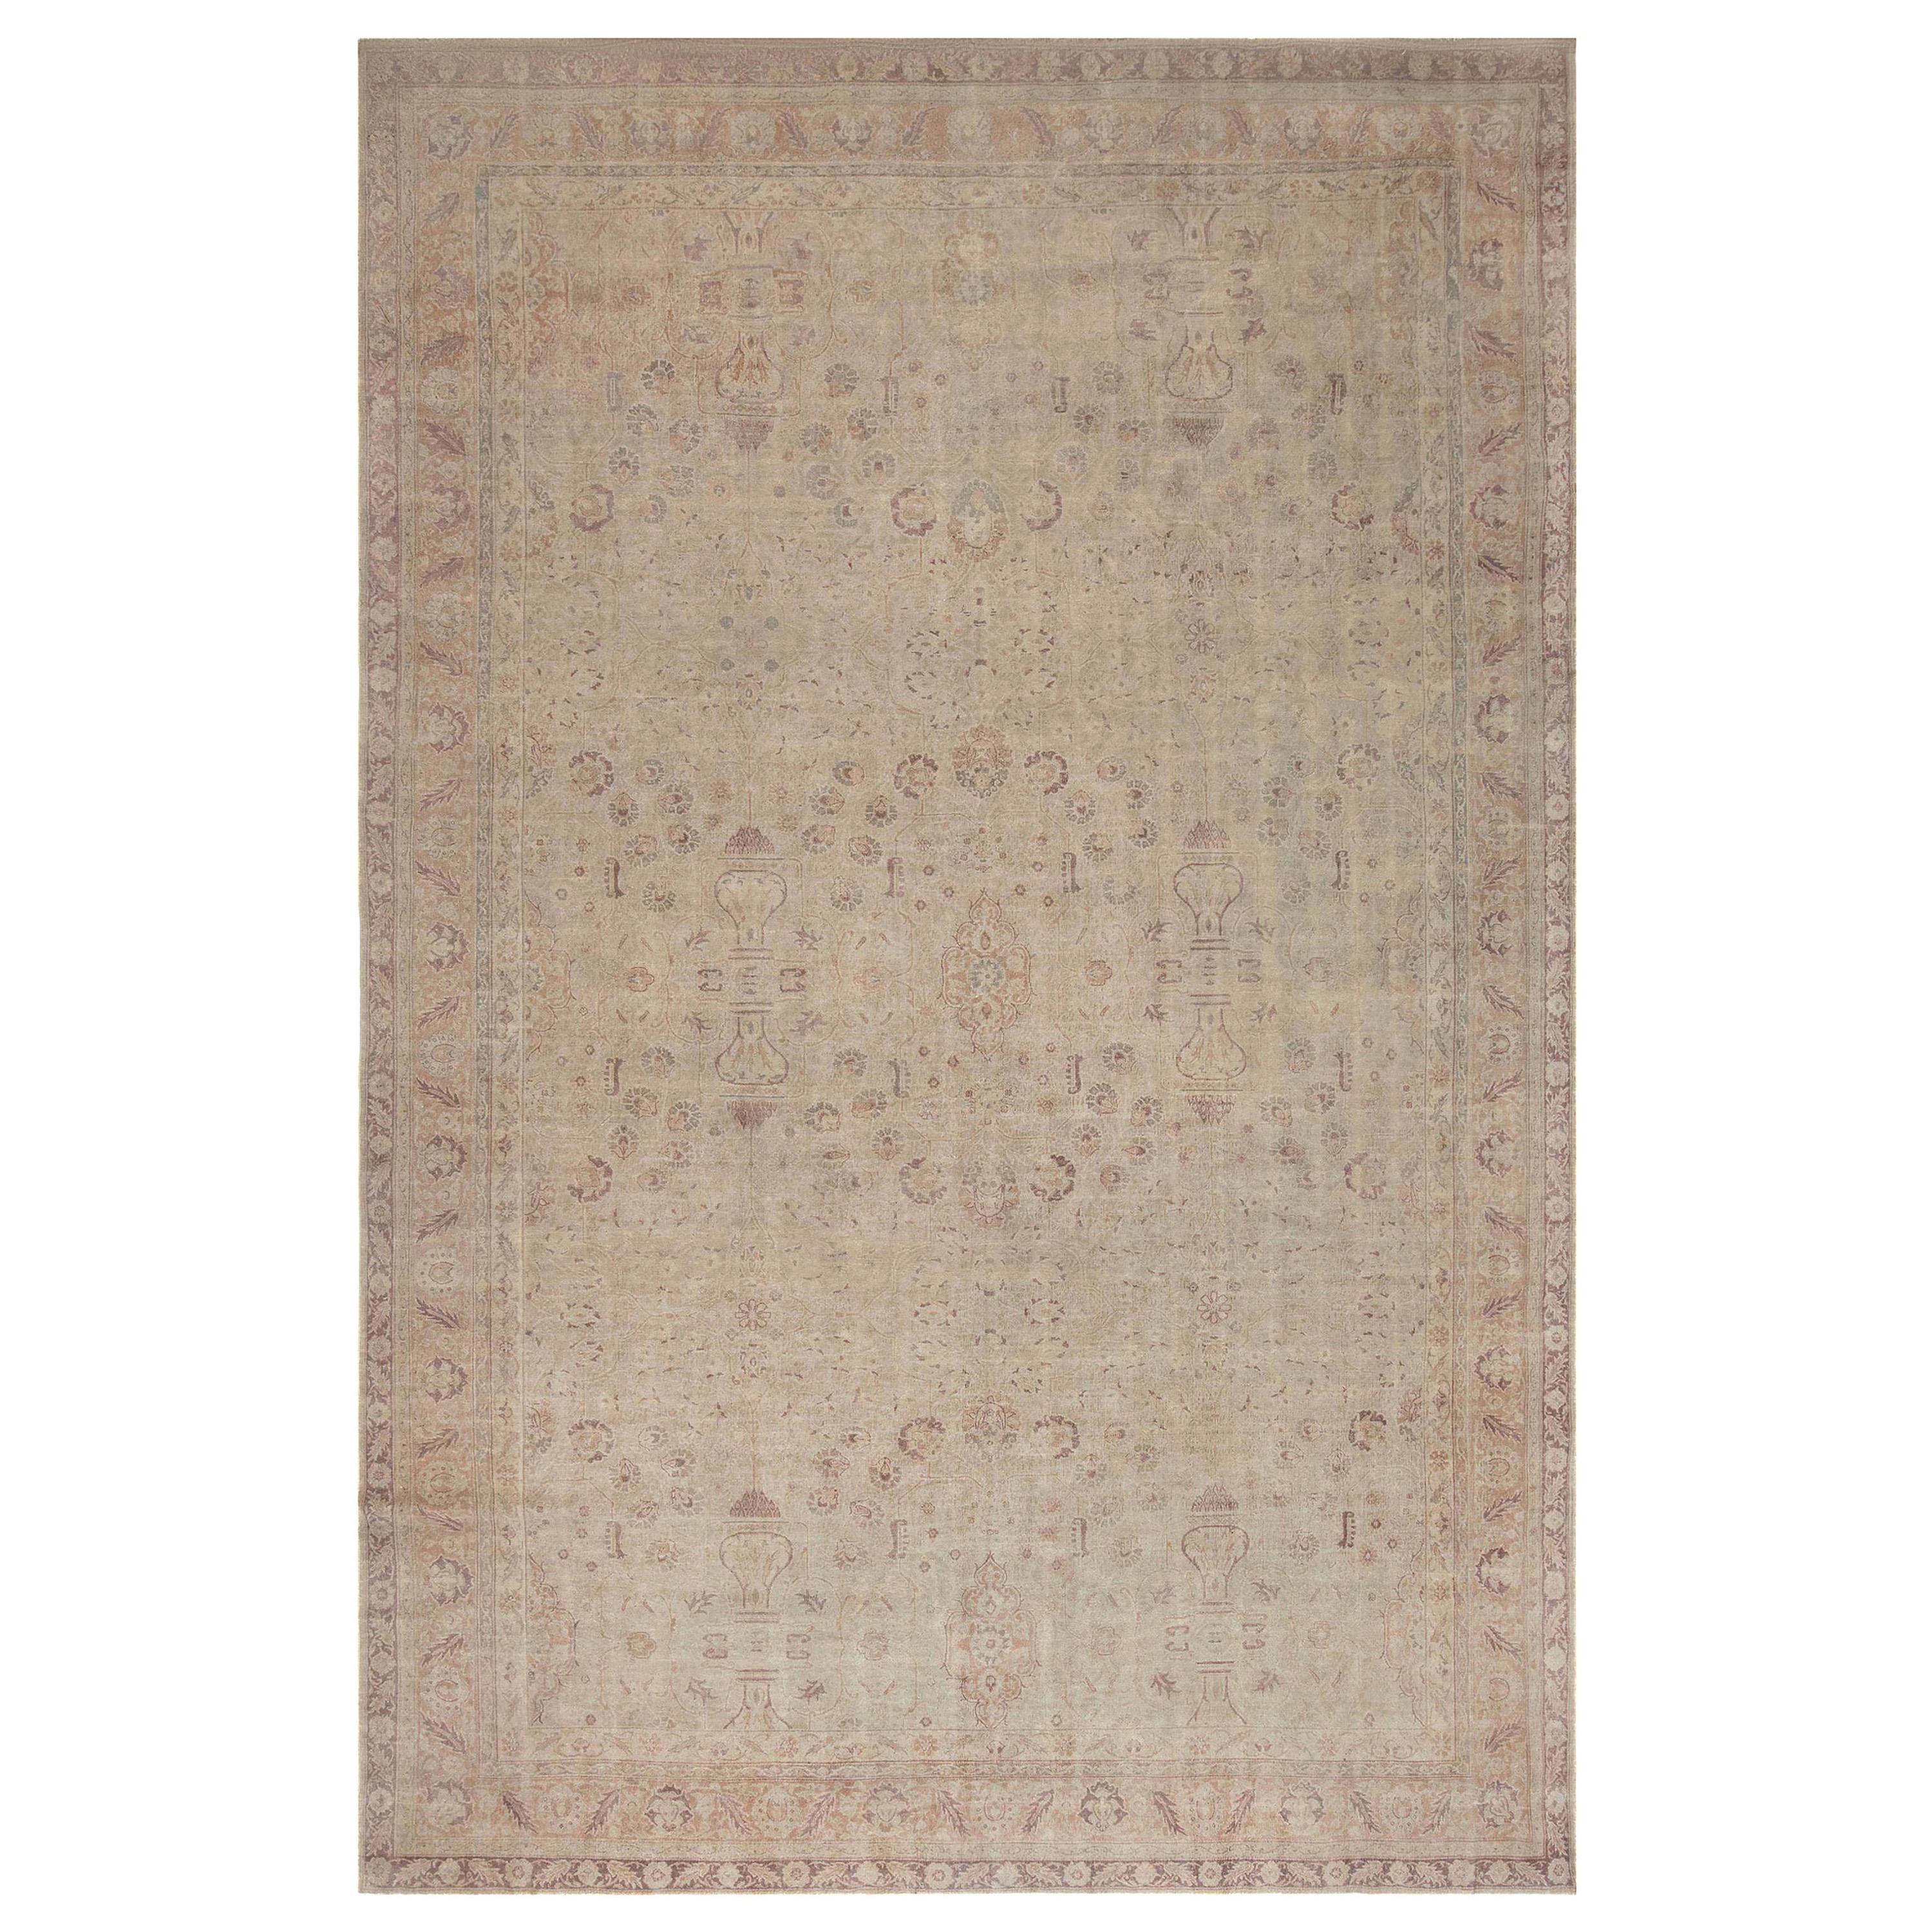 Early 20th Century Indian Handmade Wool Rug For Sale